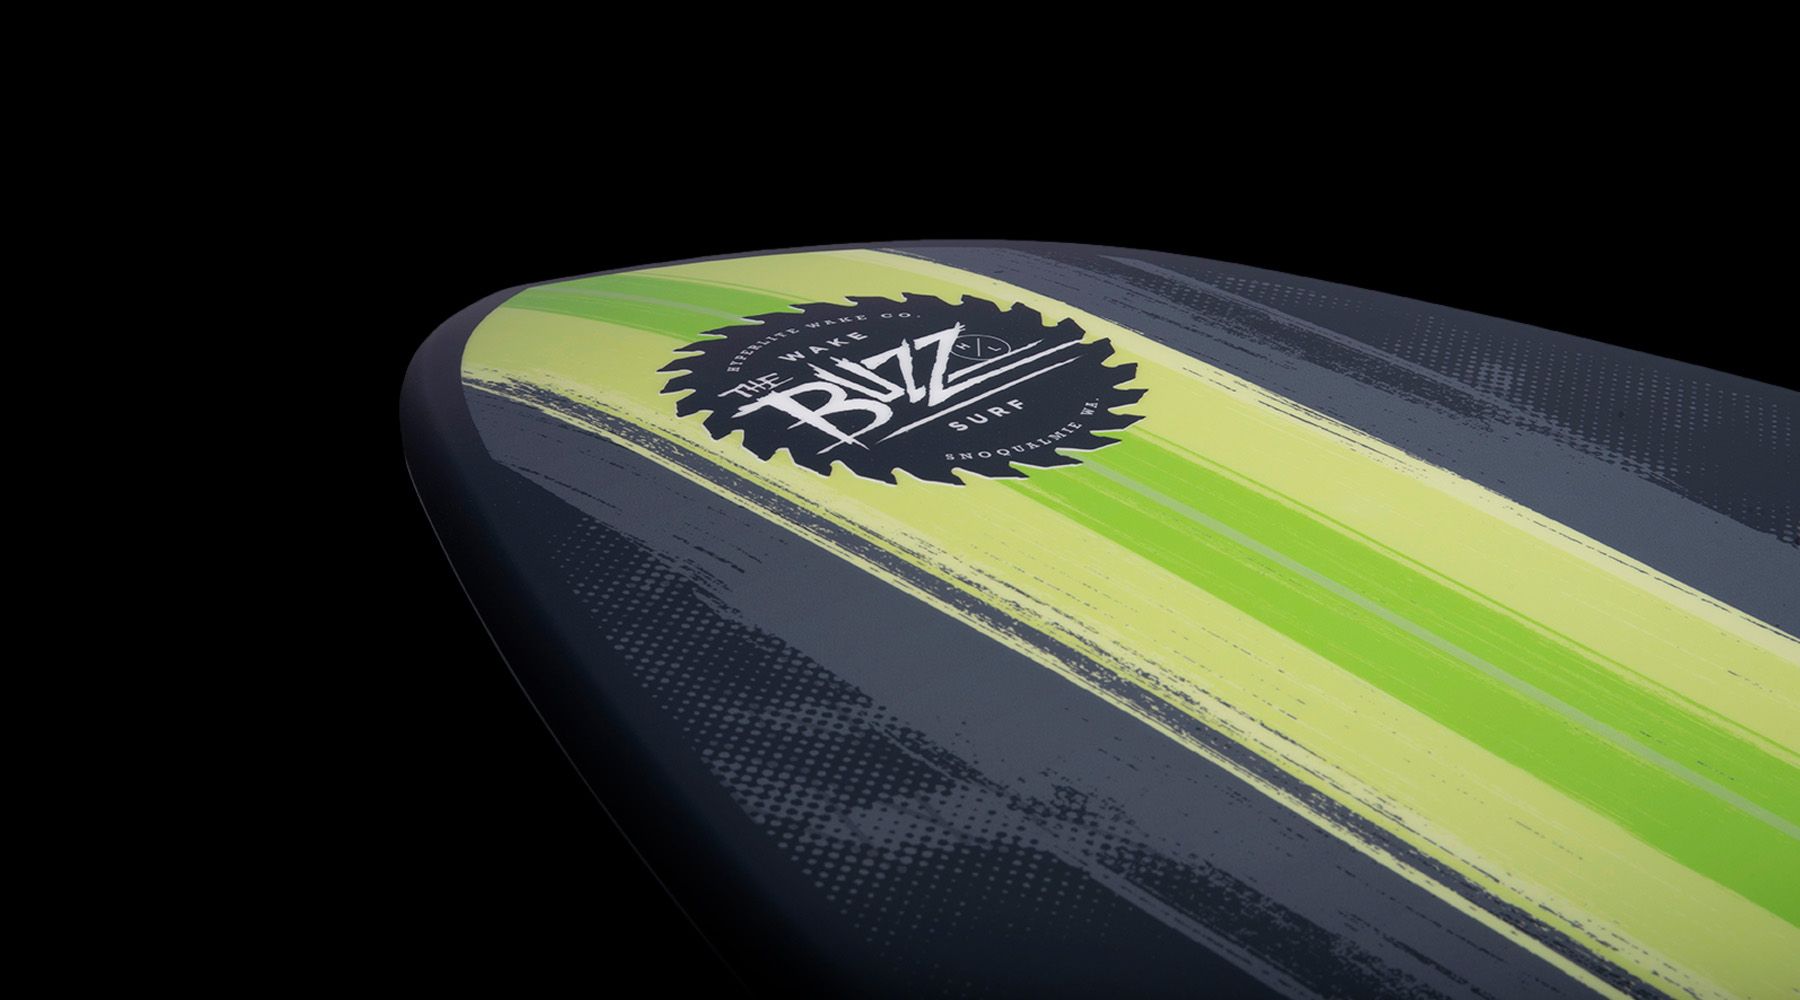 A Hyperlite 2023 Buzz Wakesurf Board with a hybrid style and DuraShell construction.